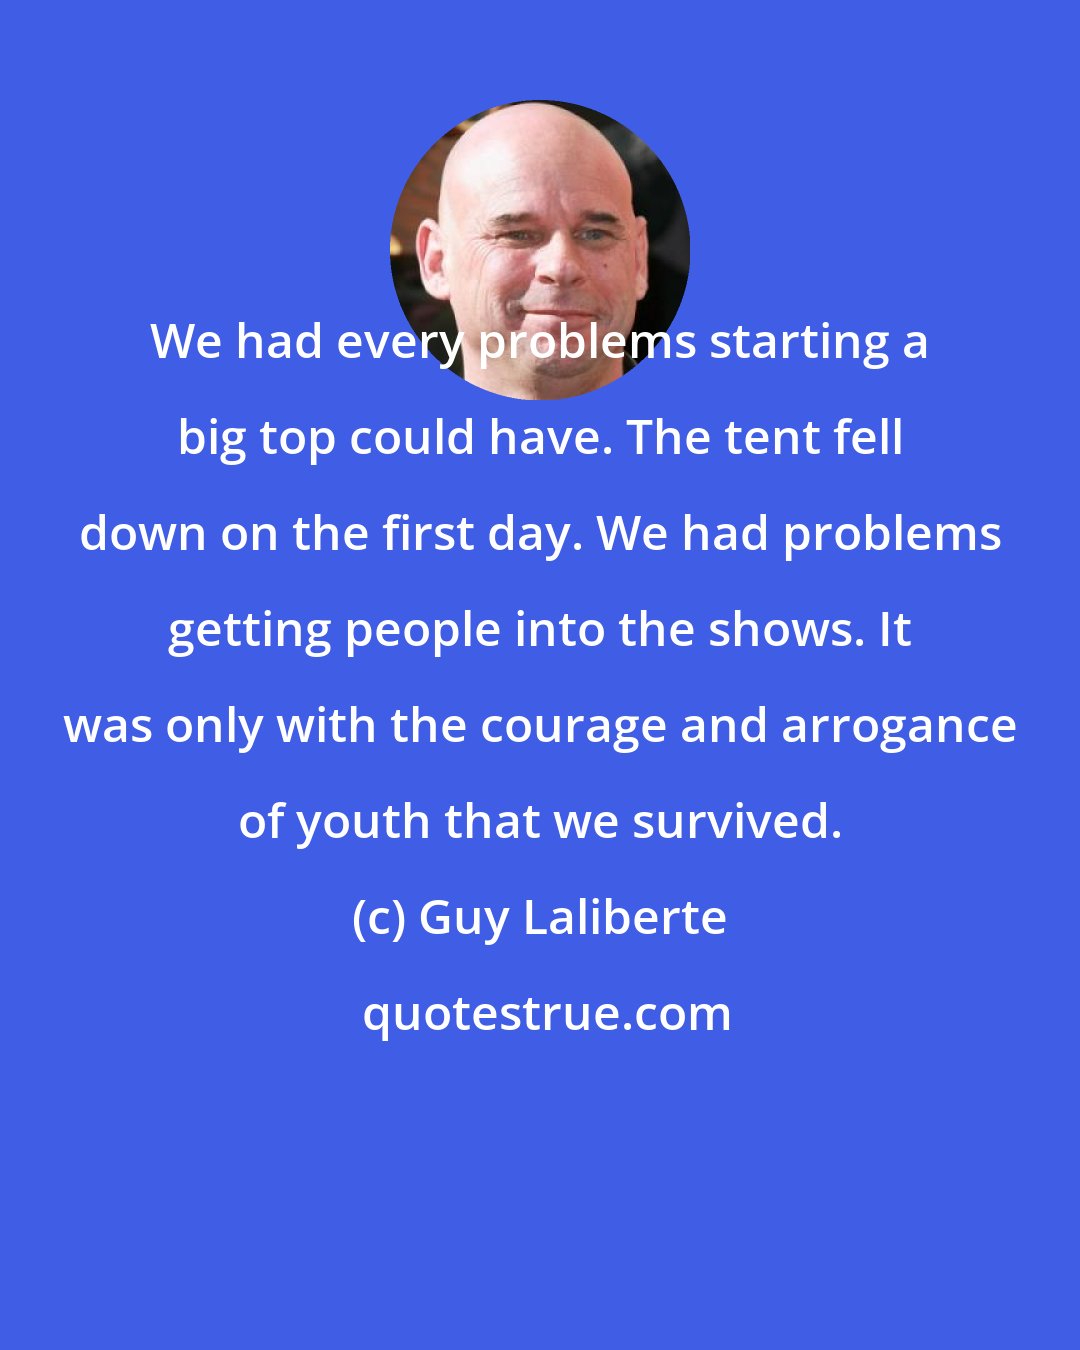 Guy Laliberte: We had every problems starting a big top could have. The tent fell down on the first day. We had problems getting people into the shows. It was only with the courage and arrogance of youth that we survived.